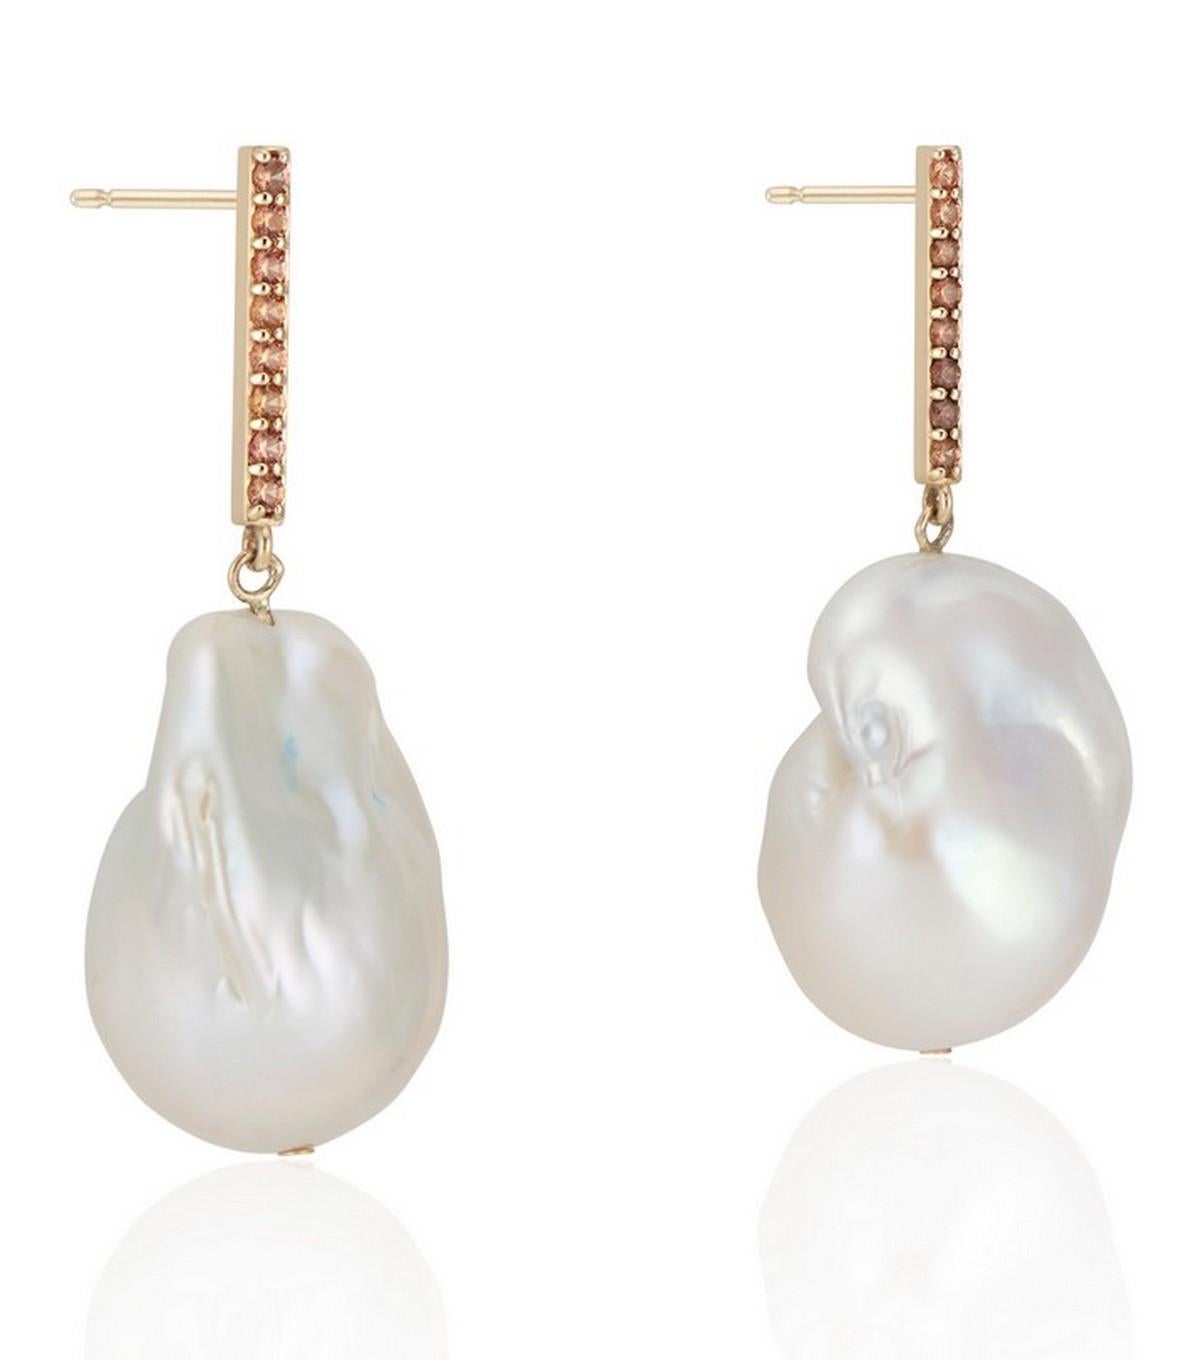 14K Vertical Yellow Gold Bar with a beautiful soft shade of orange sapphire and baroque pearl drop earring.

The hue of orange sapphire against the high polish yellow gold contrasts beautifully with the pearl, and the shimmering vertical bar gives